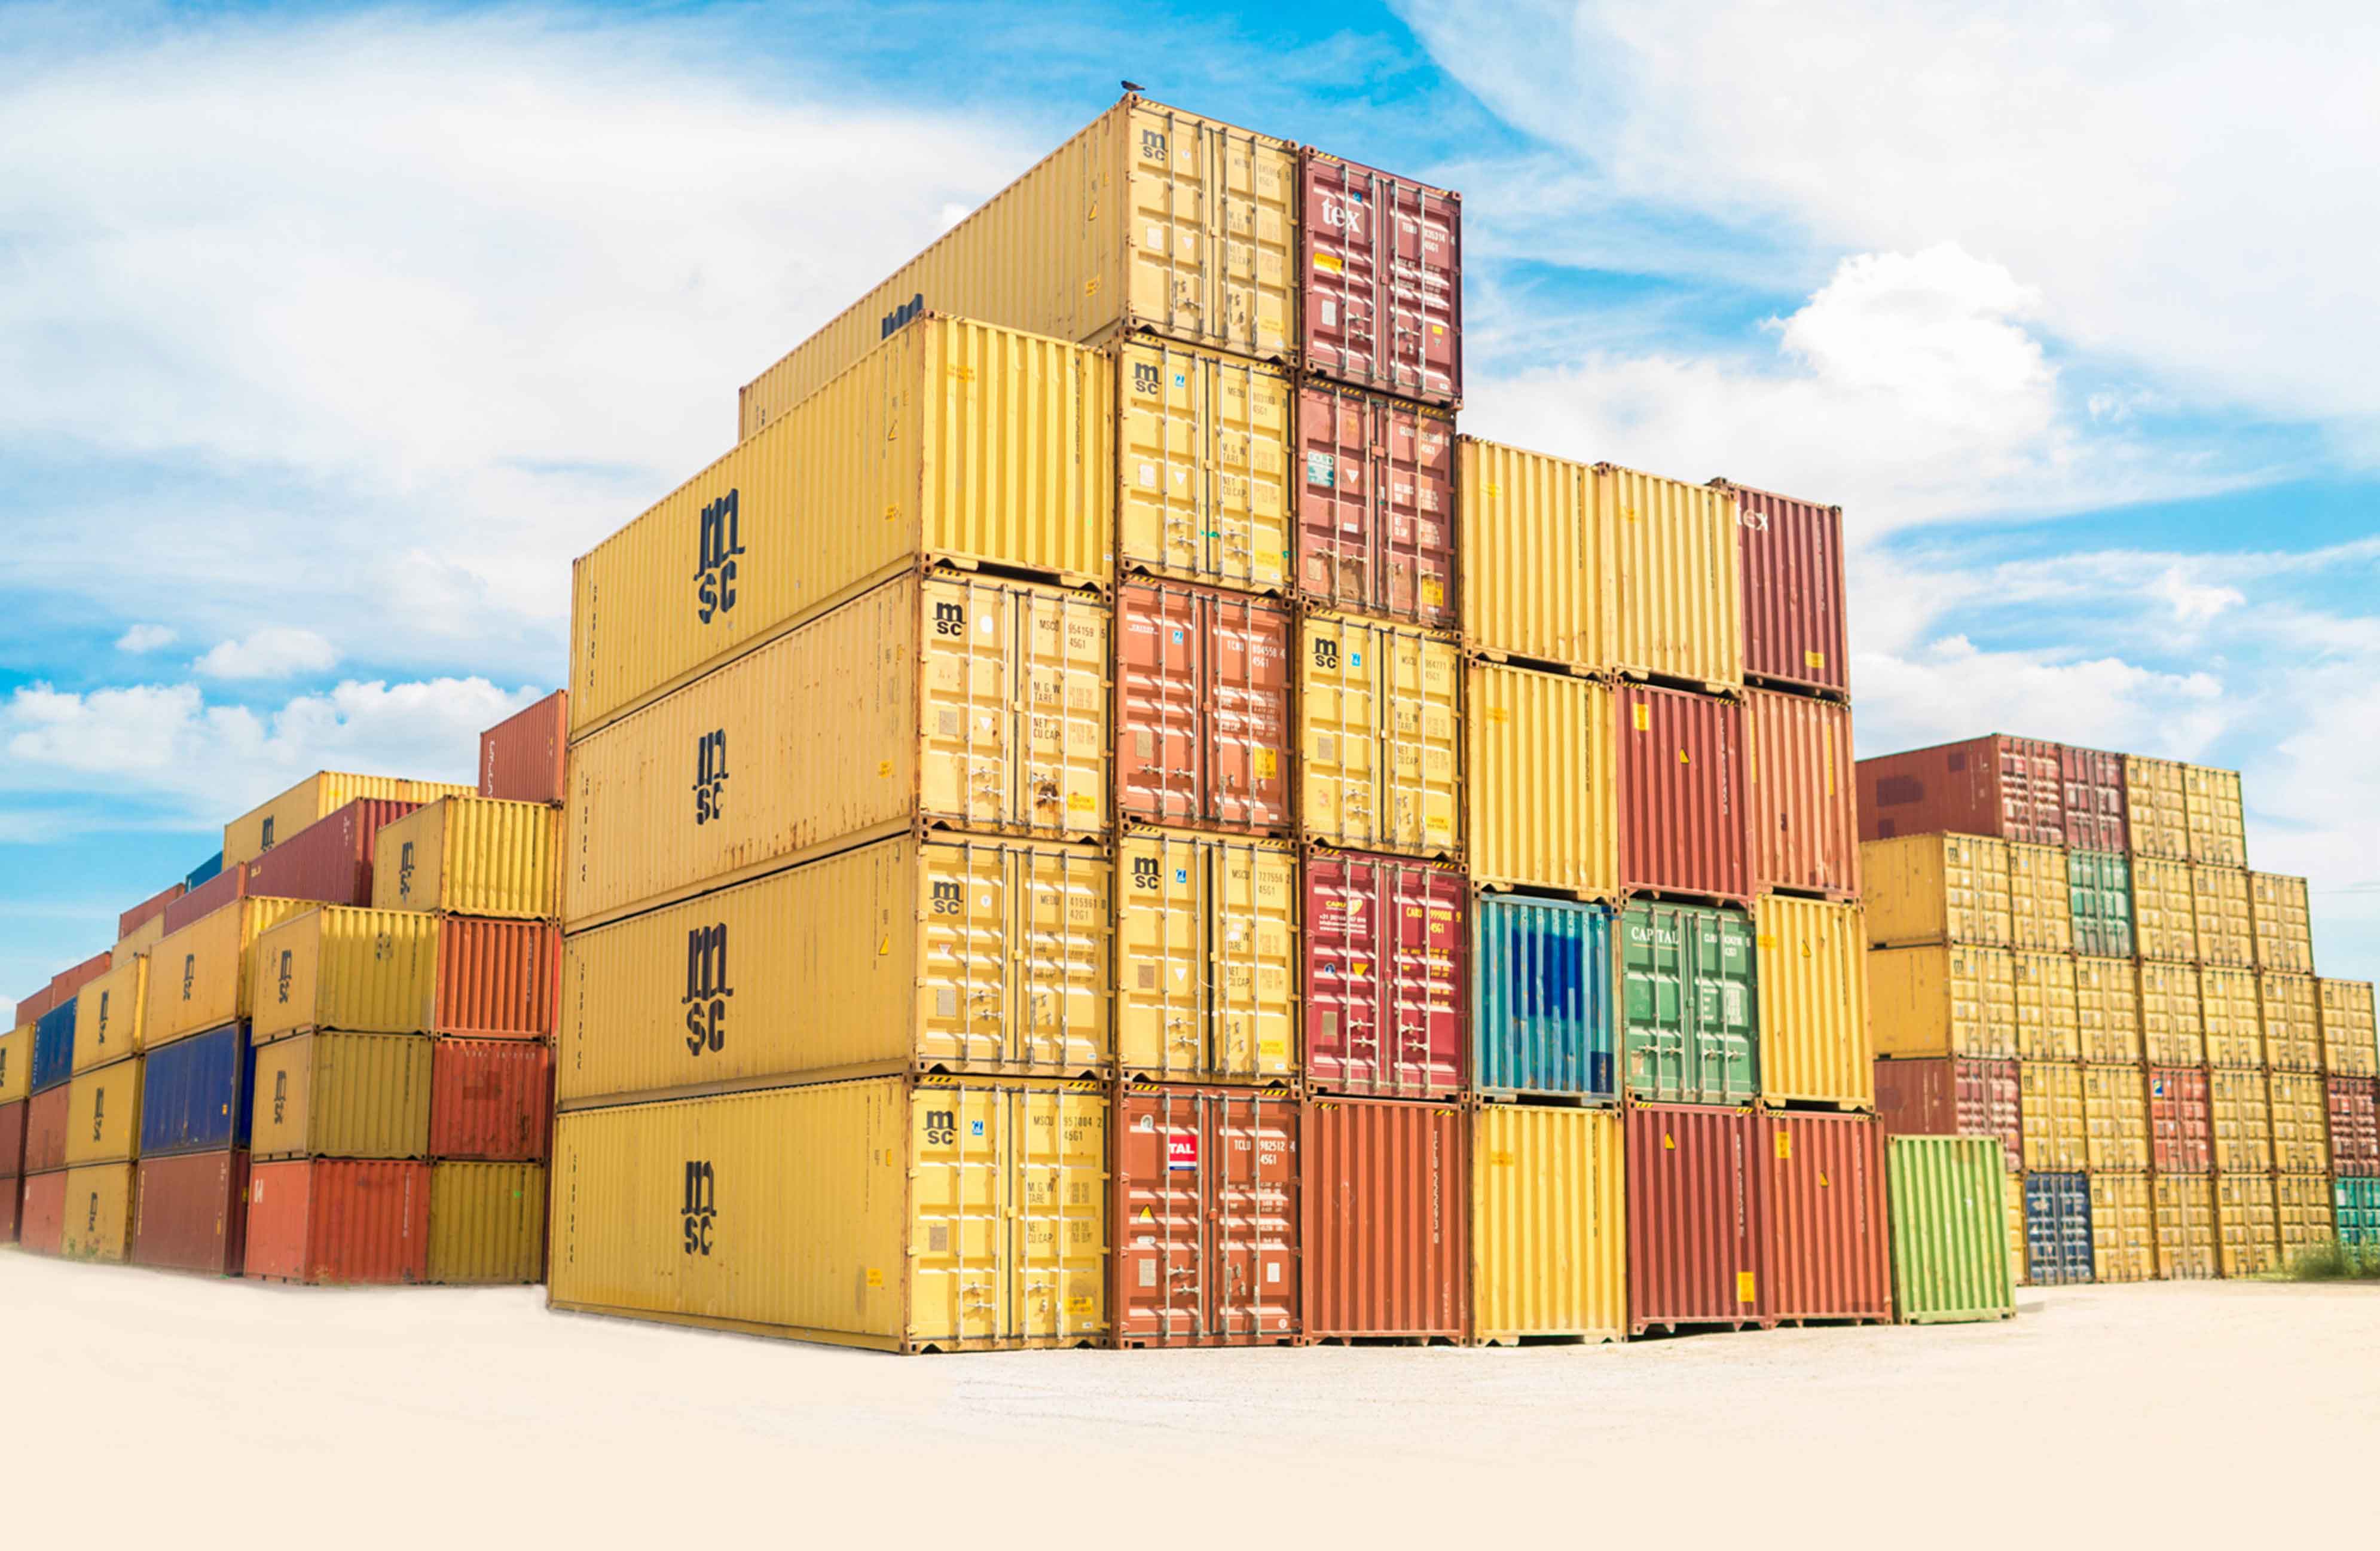 Are Shipping Containers Good for Storage?